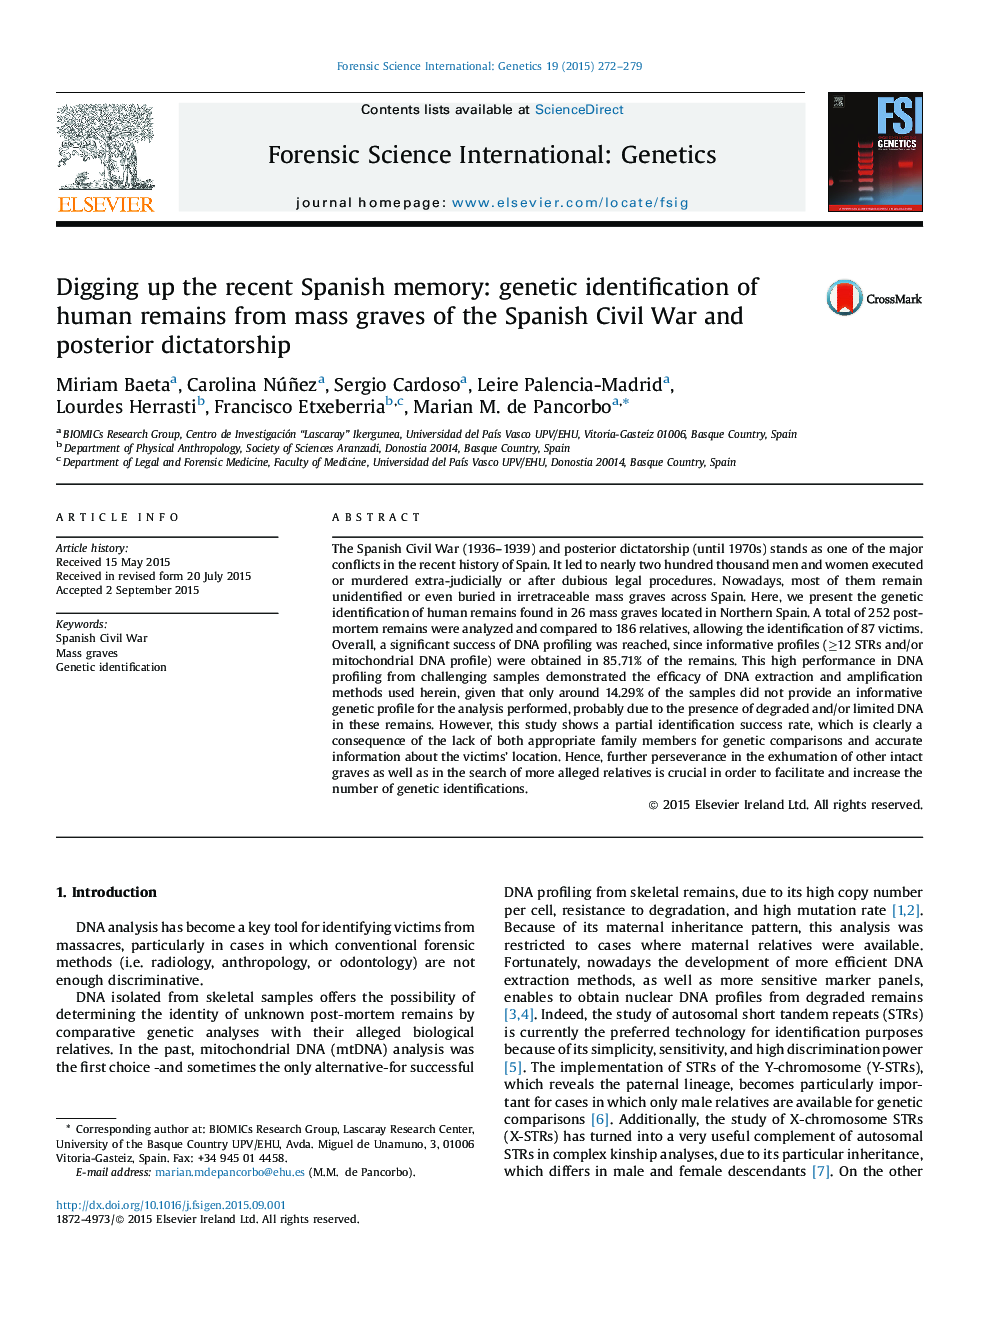 Digging up the recent Spanish memory: genetic identification of human remains from mass graves of the Spanish Civil War and posterior dictatorship